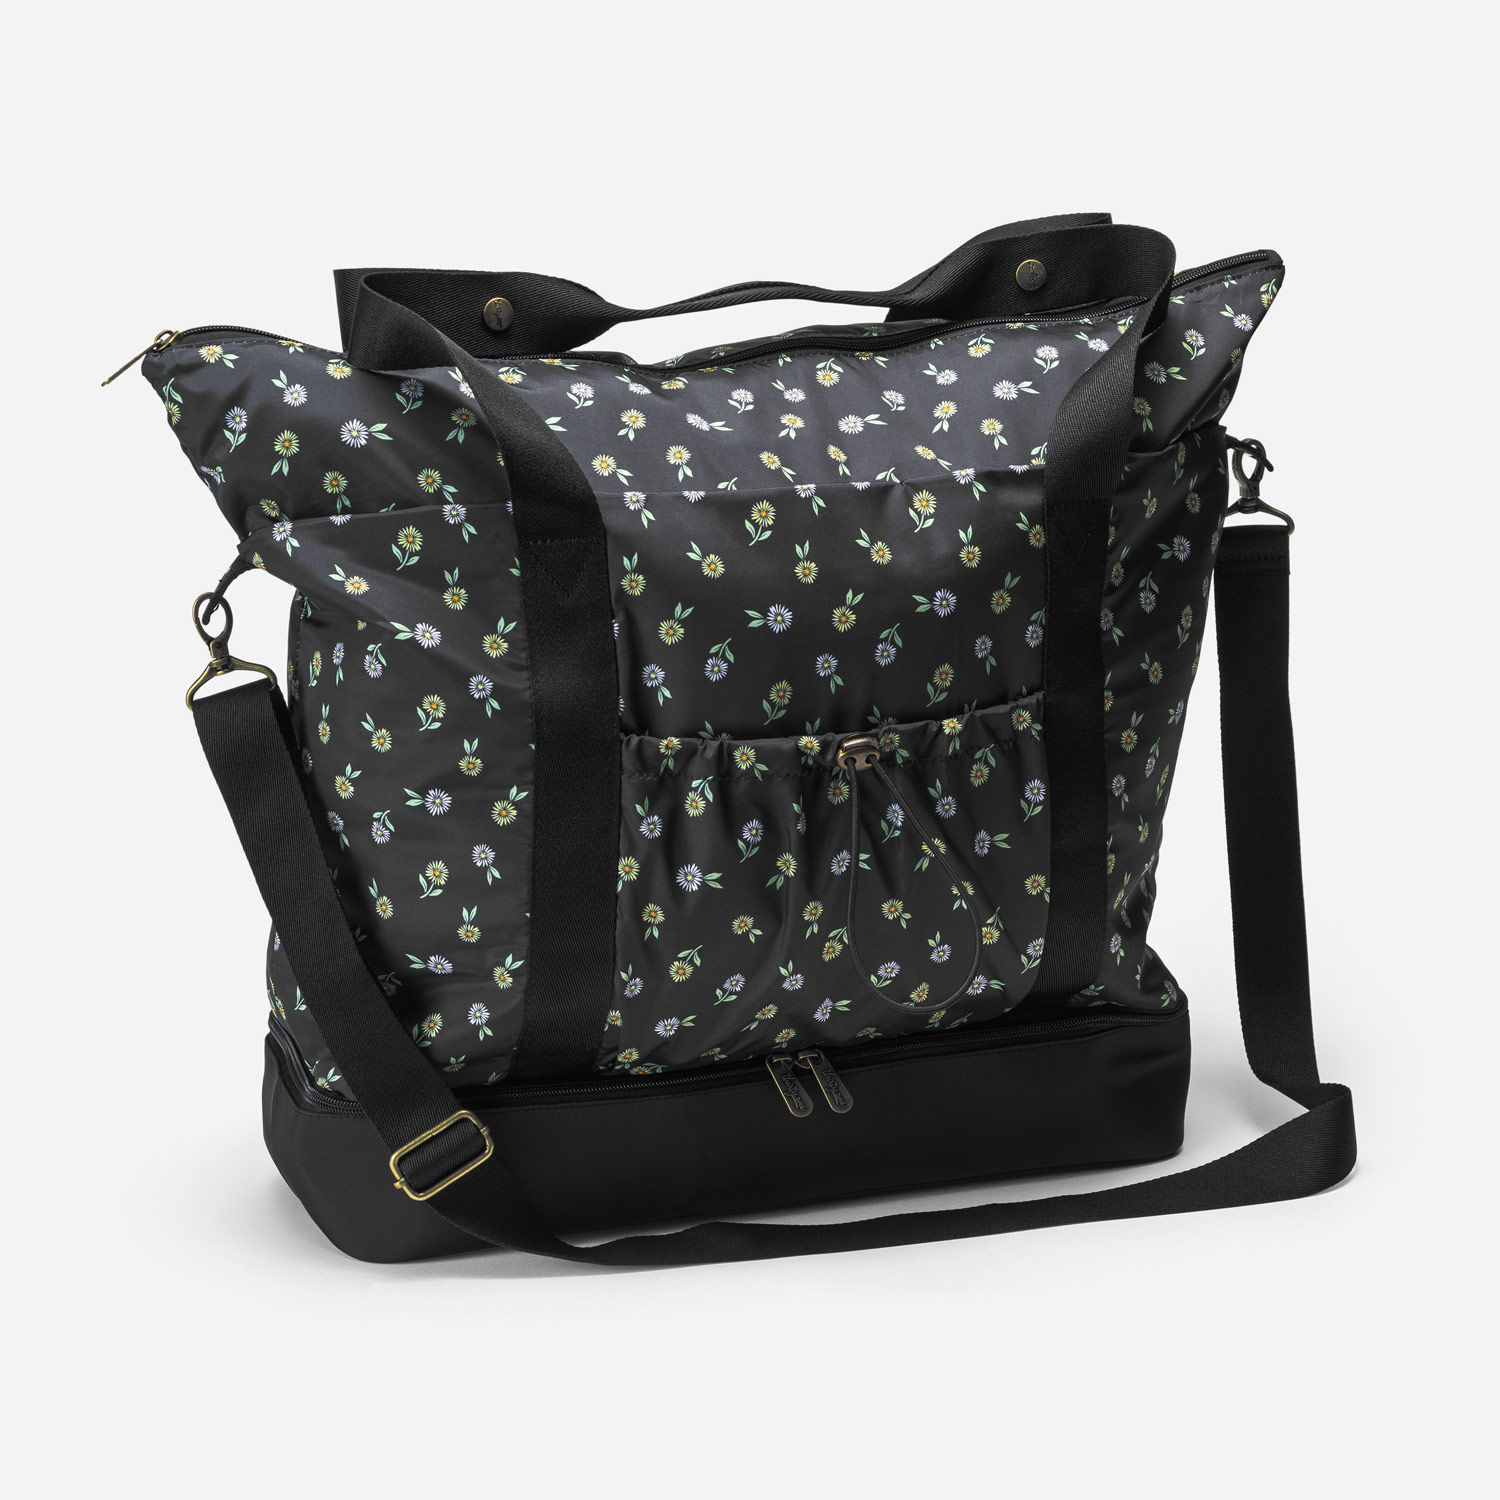 Thirty One Crossbody Organizing Tote 9025 - in Zig Zag Zoom : Amazon.in:  Bags, Wallets and Luggage